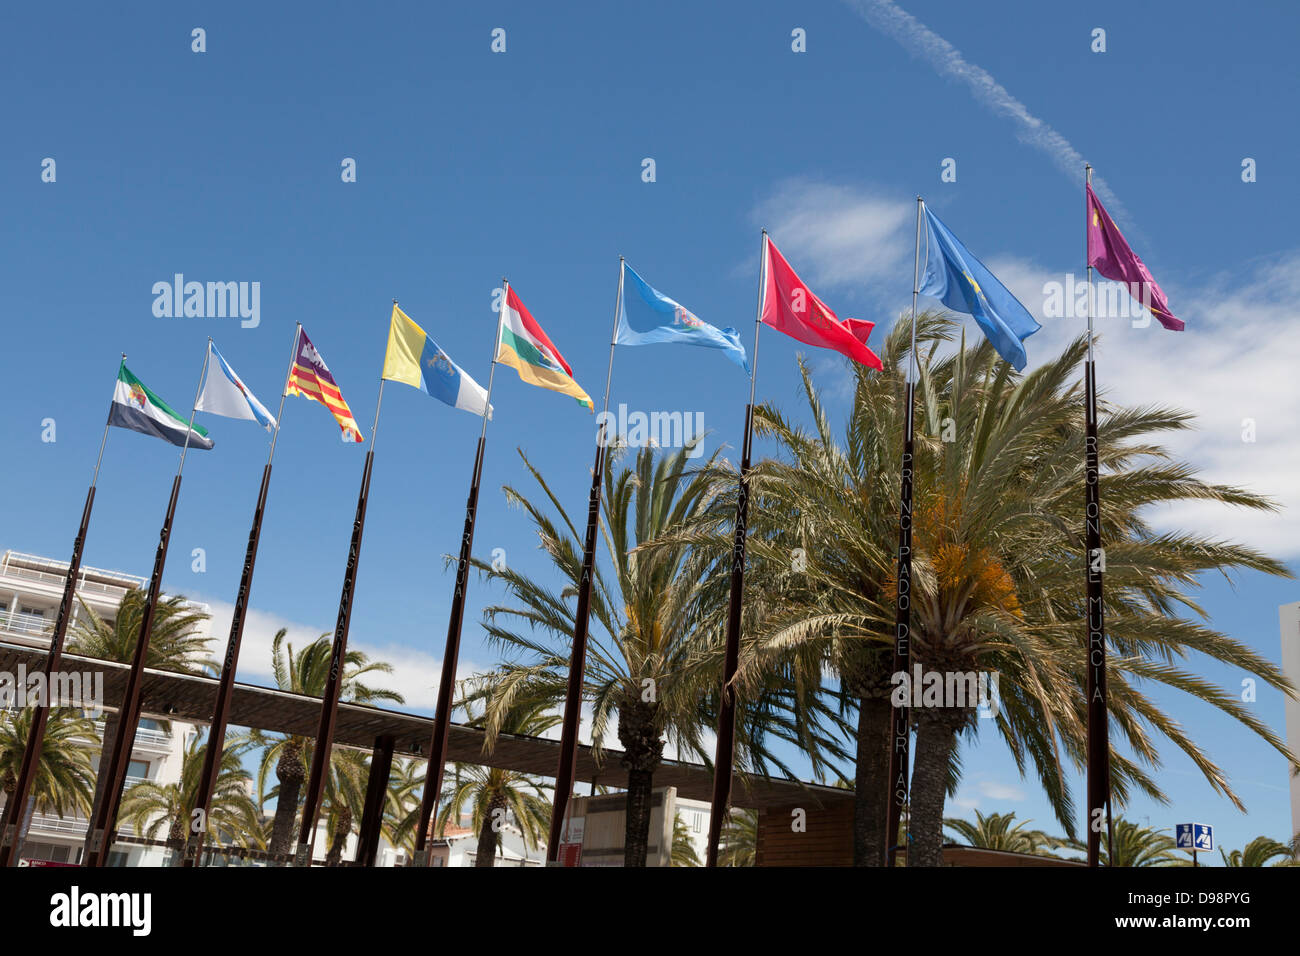 Flags of regions of Spain on flagpoles against blue sky Stock Photo